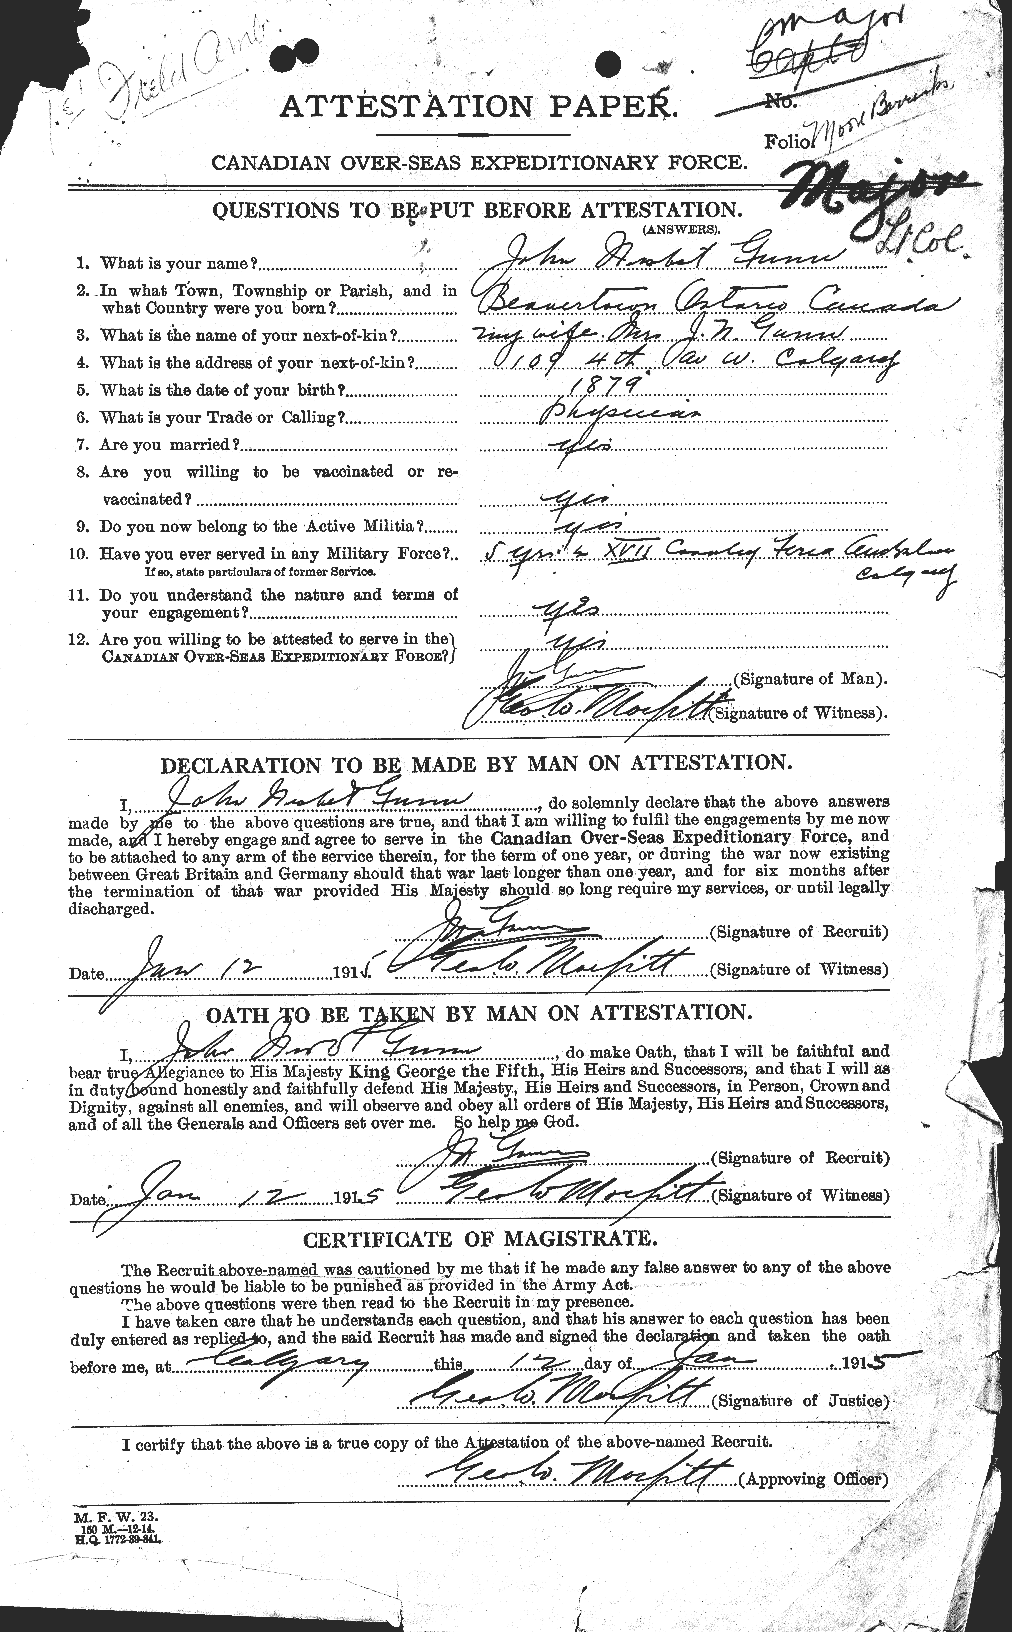 Personnel Records of the First World War - CEF 369299a